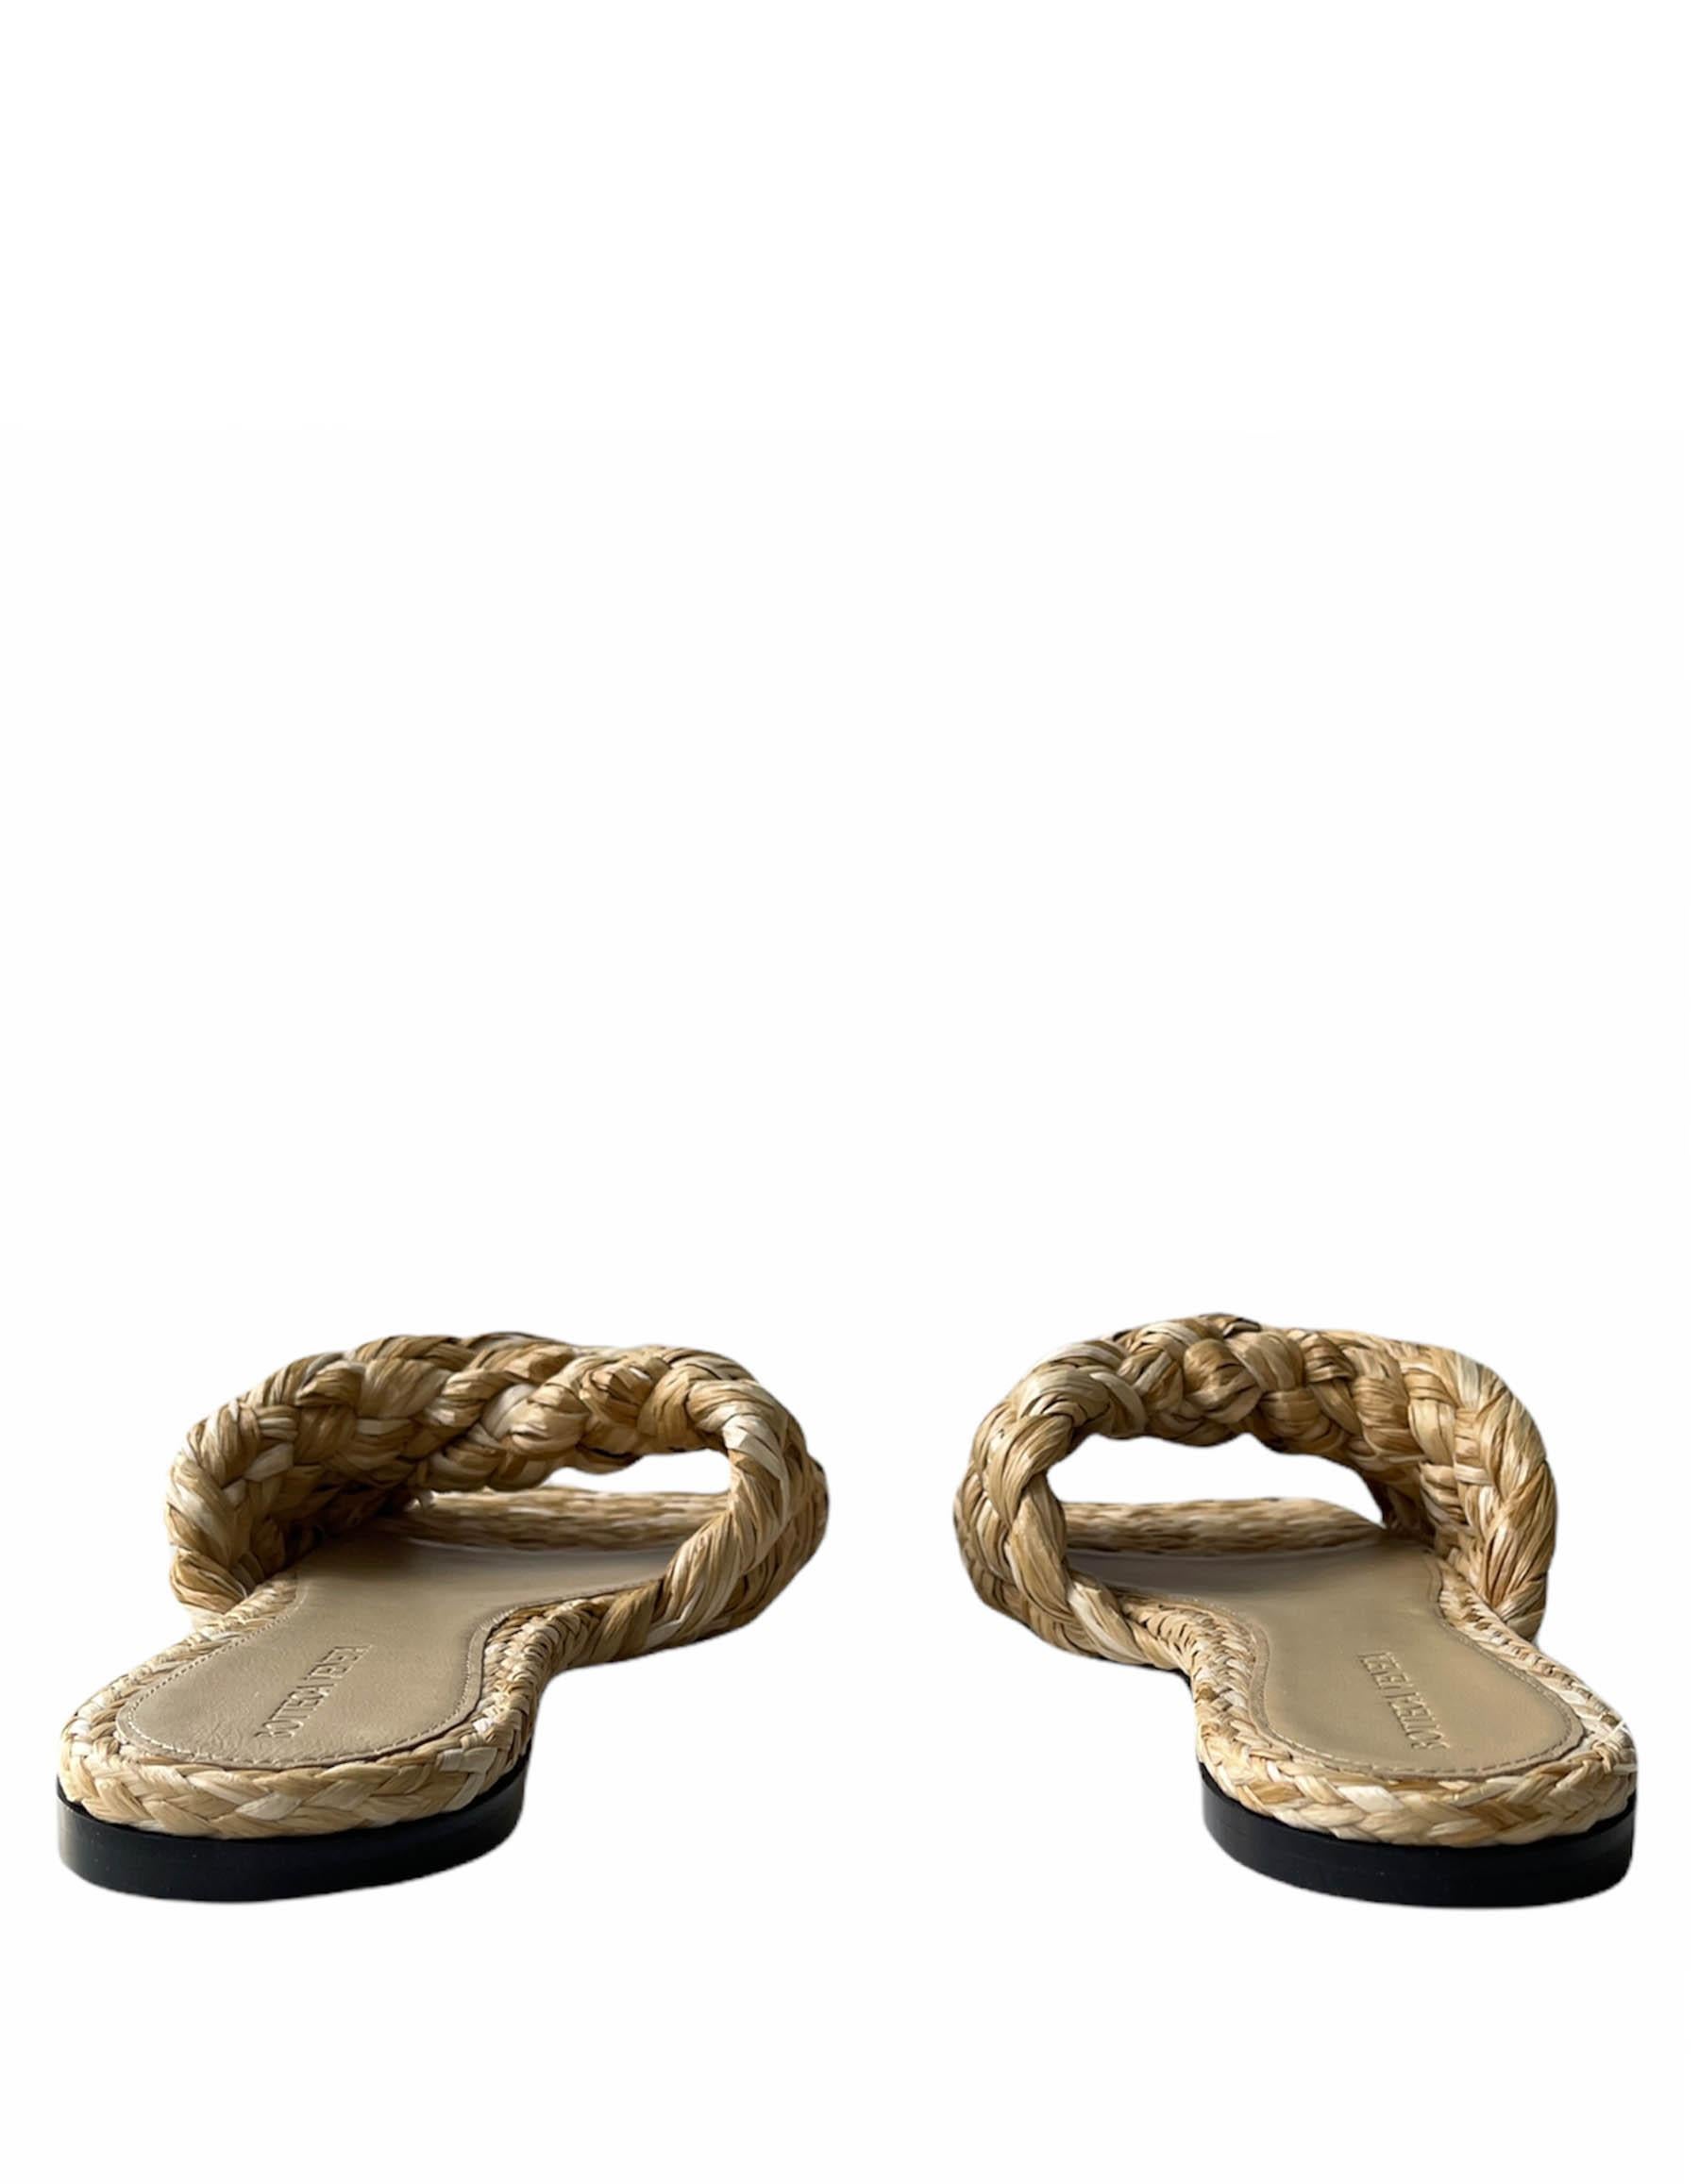 Bottega Veneta NEW Raffia Intrecciato Woven Raffia Sandal Slides sz 40

Made In: Italy
Year of Production: 2021
Color: Beige
Materials: Woven raffia
Closure/Opening: Slide on
Overall Condition: New without box or dustbag

Marked Size: 40